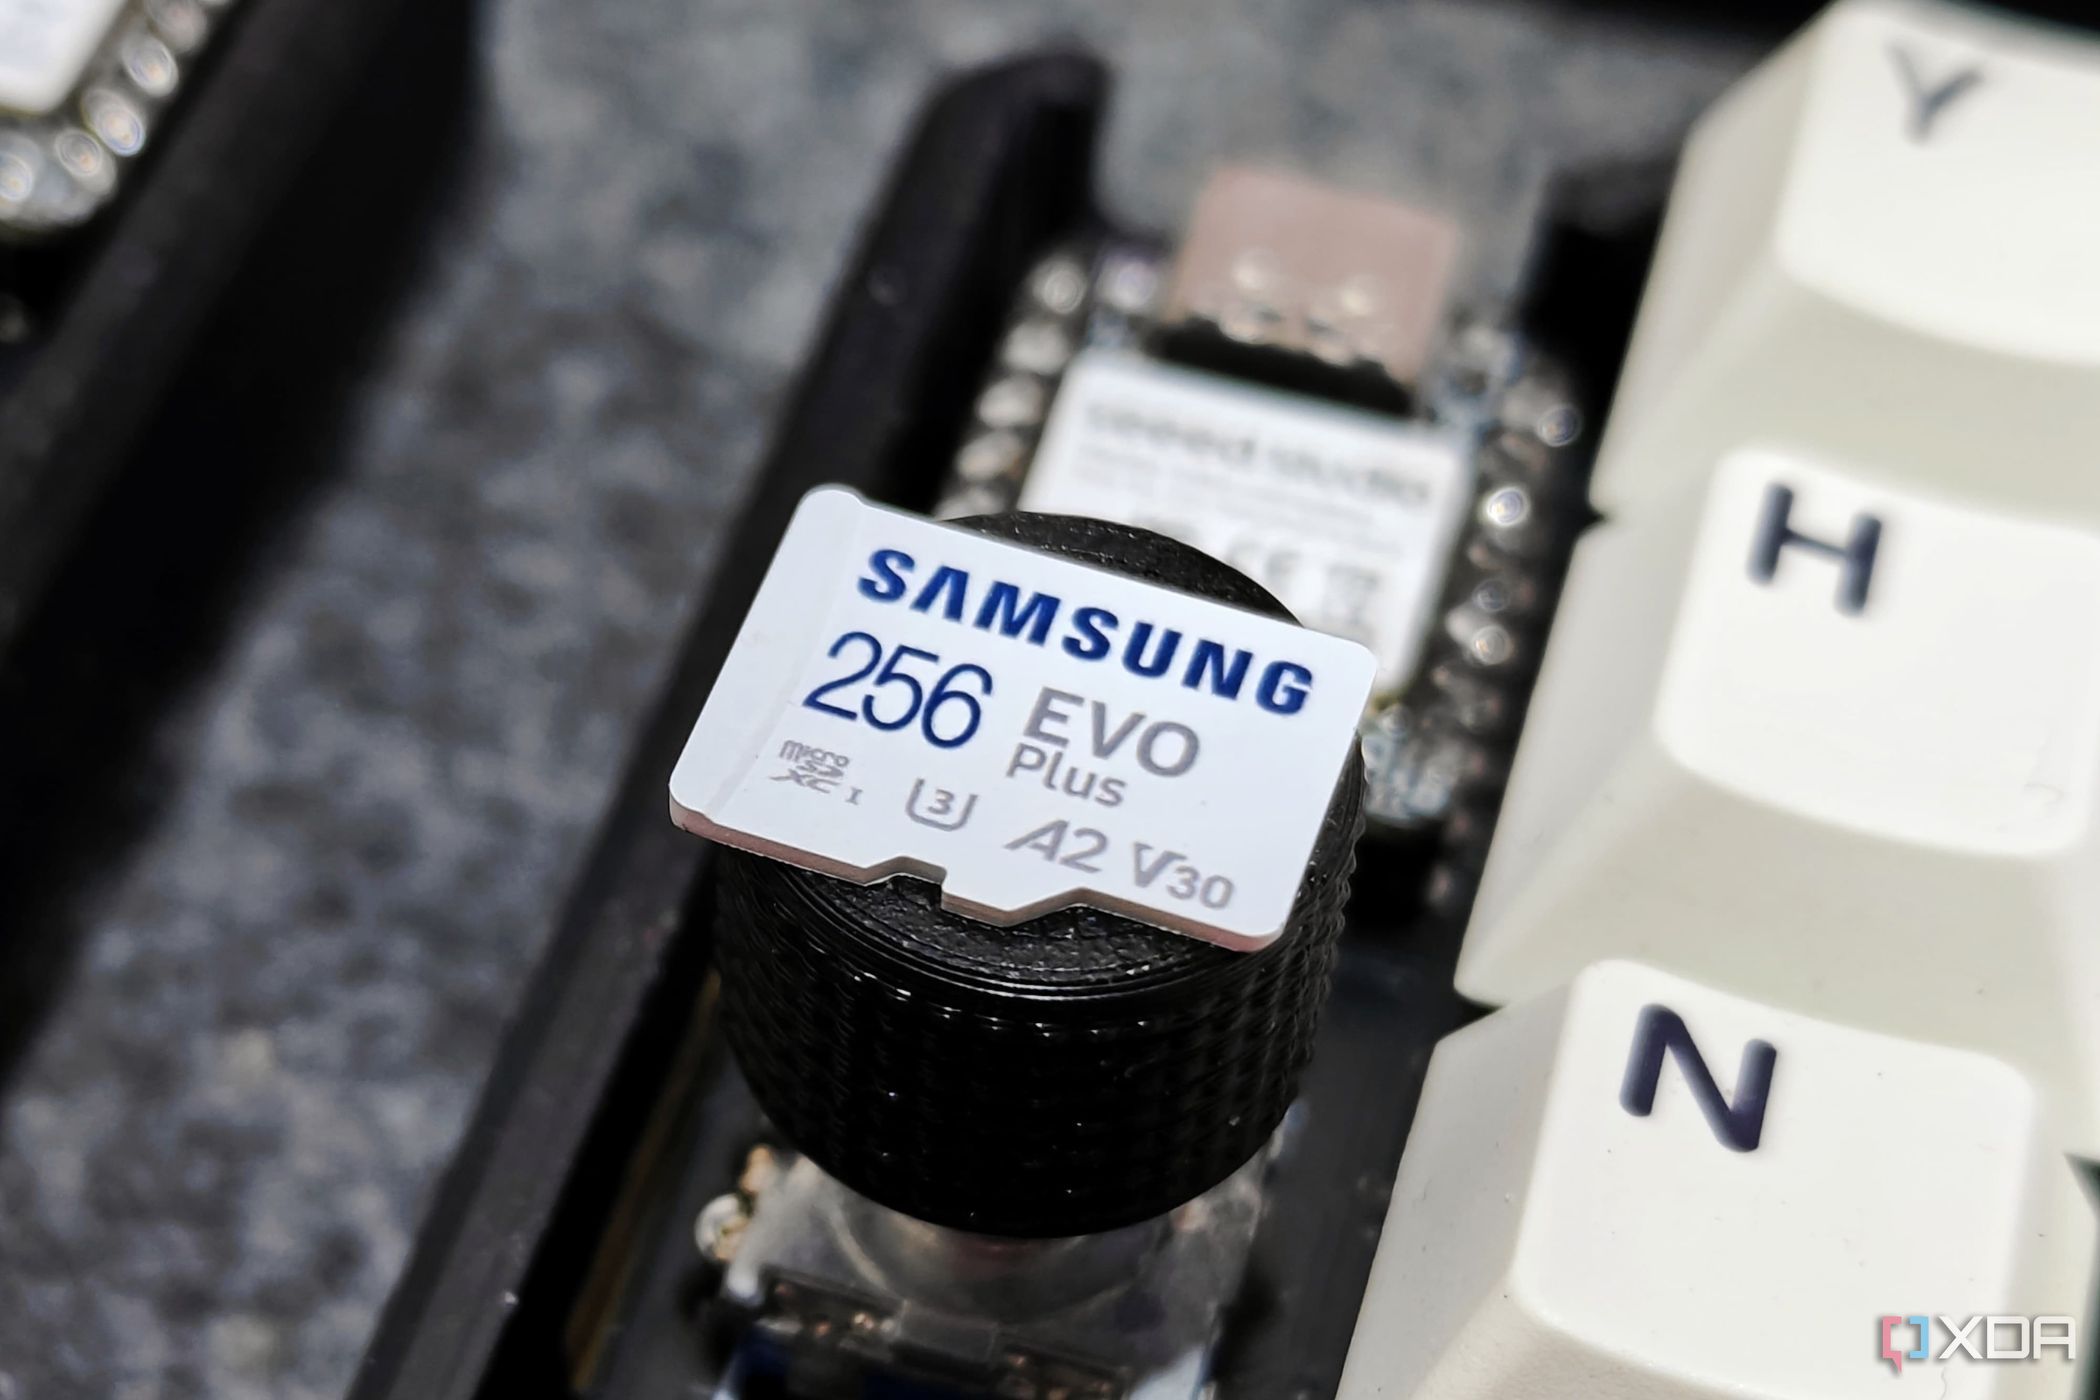 An image showing a Samsung EVO Plus SDXC V30 card placed on a rotary knob of a keyboard.